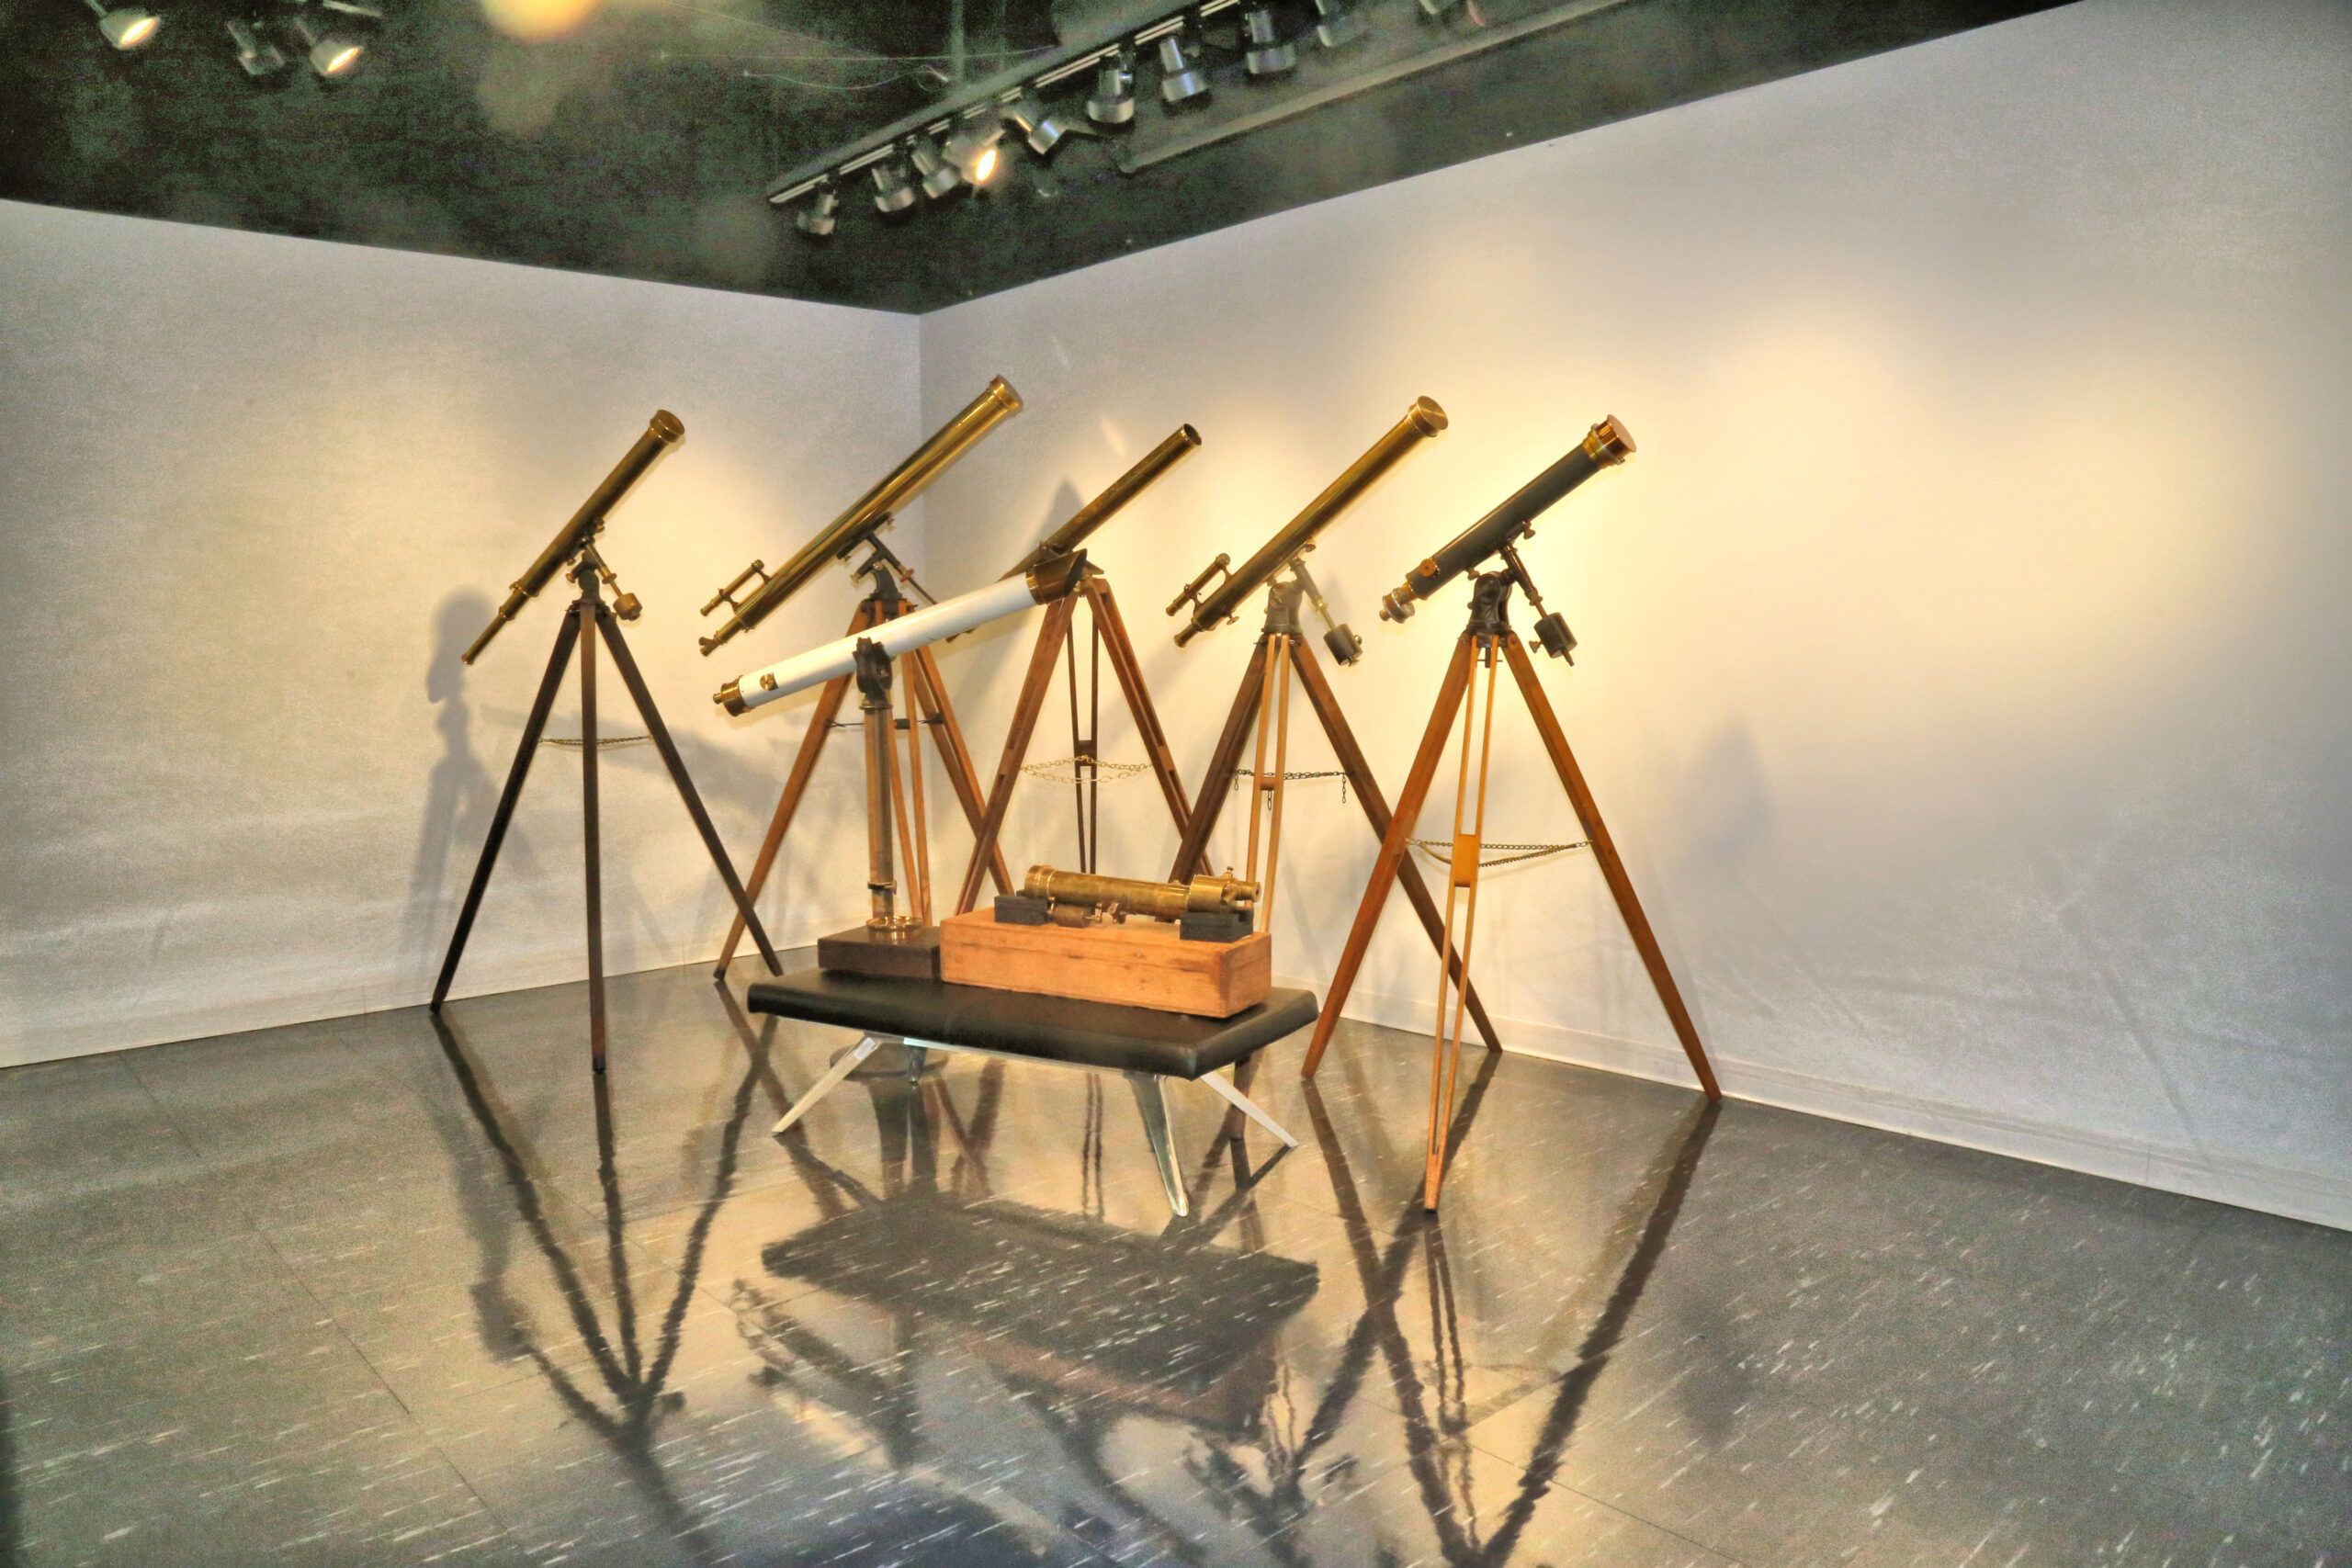 Antique telescope collection opens up the universe for students and faculty